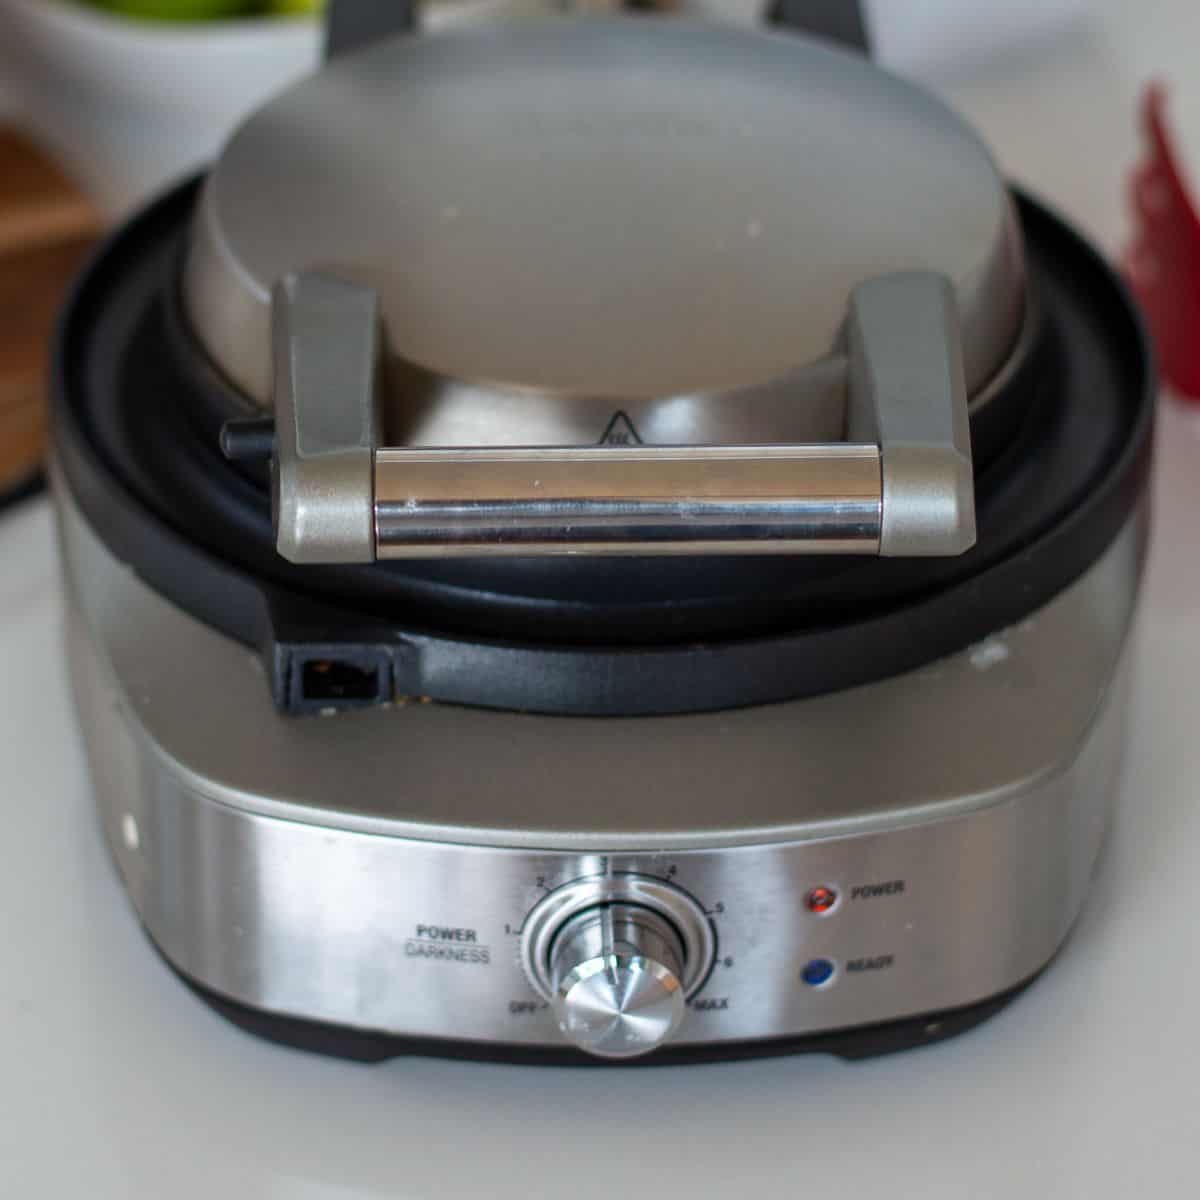 The Breville No-mess Waffle Maker.